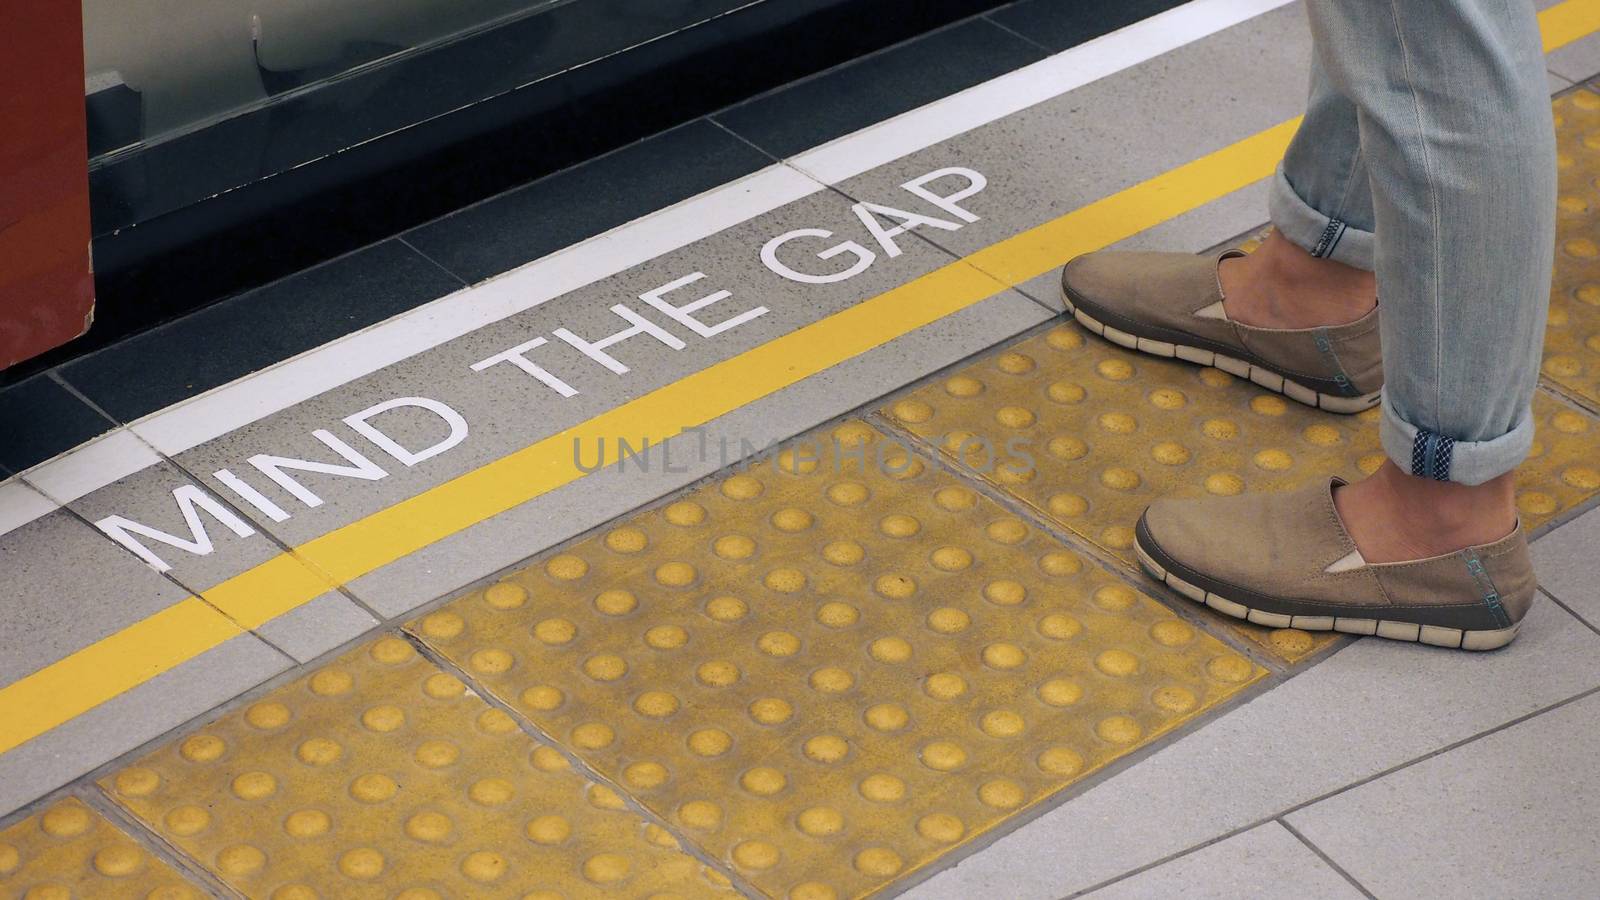 Mind the gap with white color  by gnepphoto